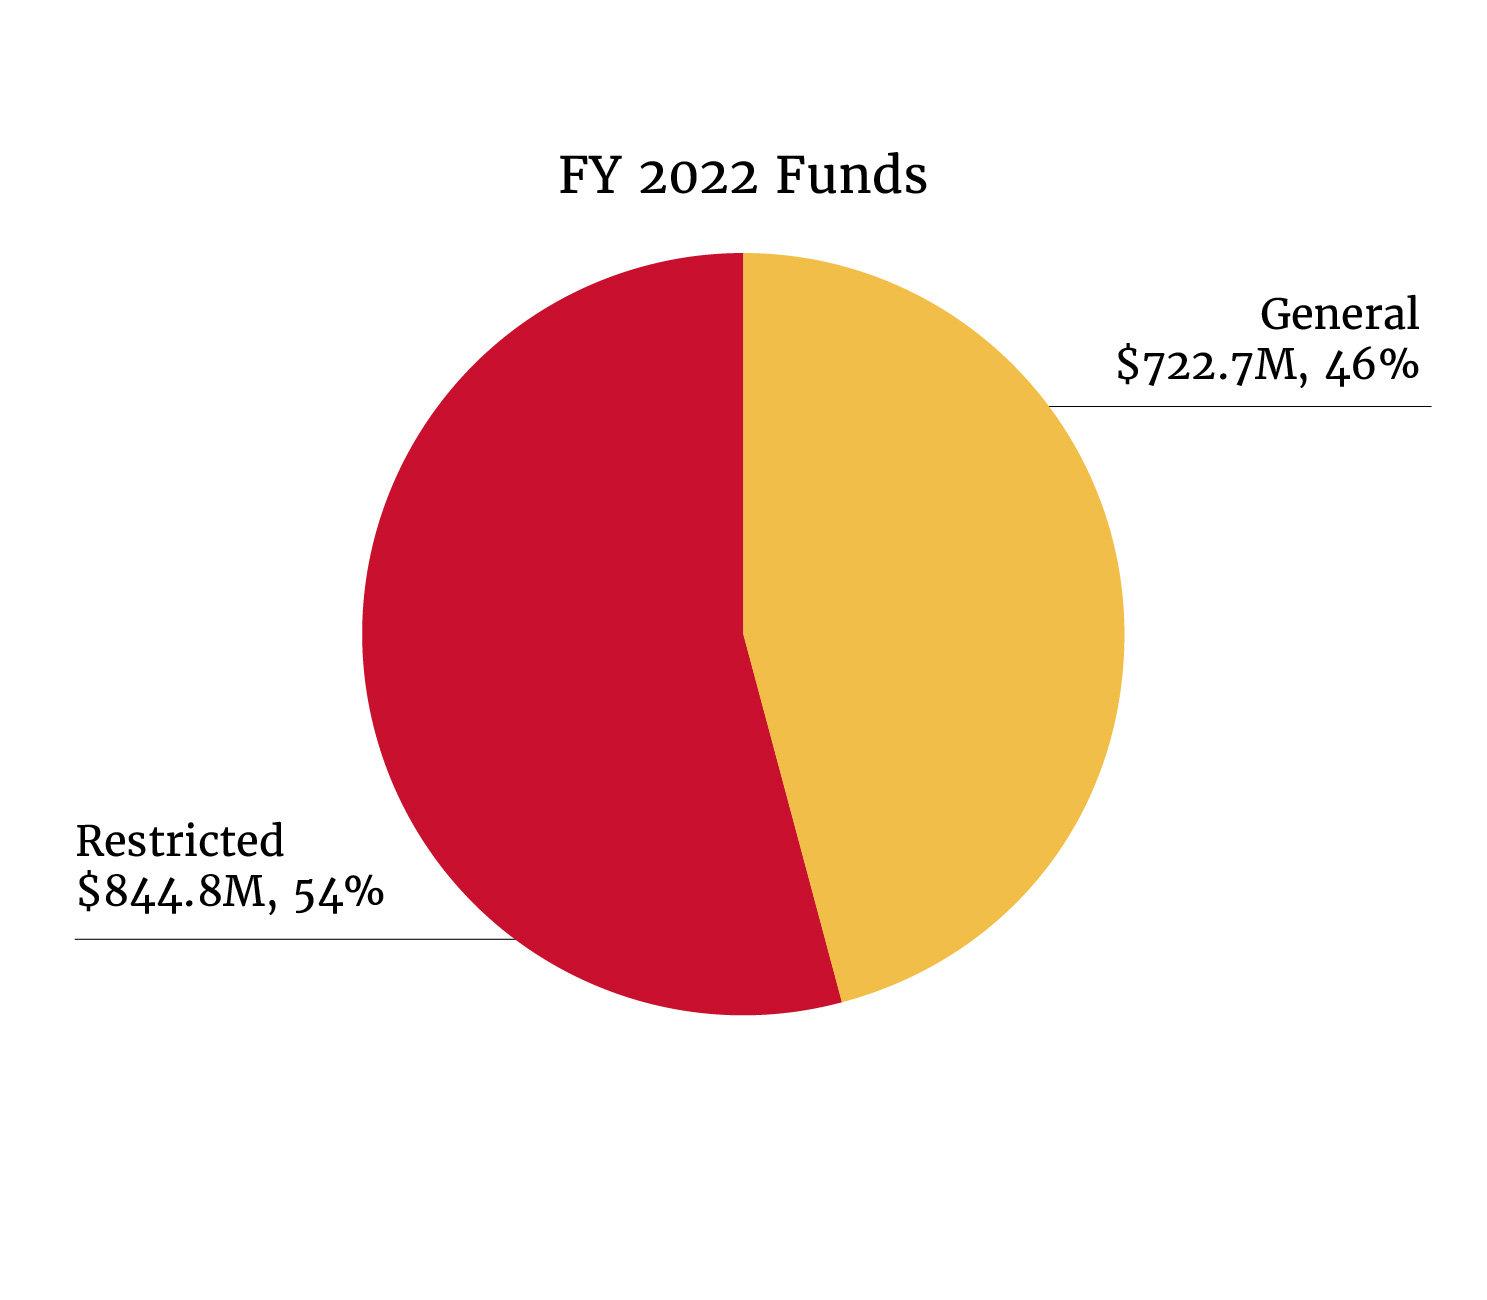 FY2022 Funds pie chart